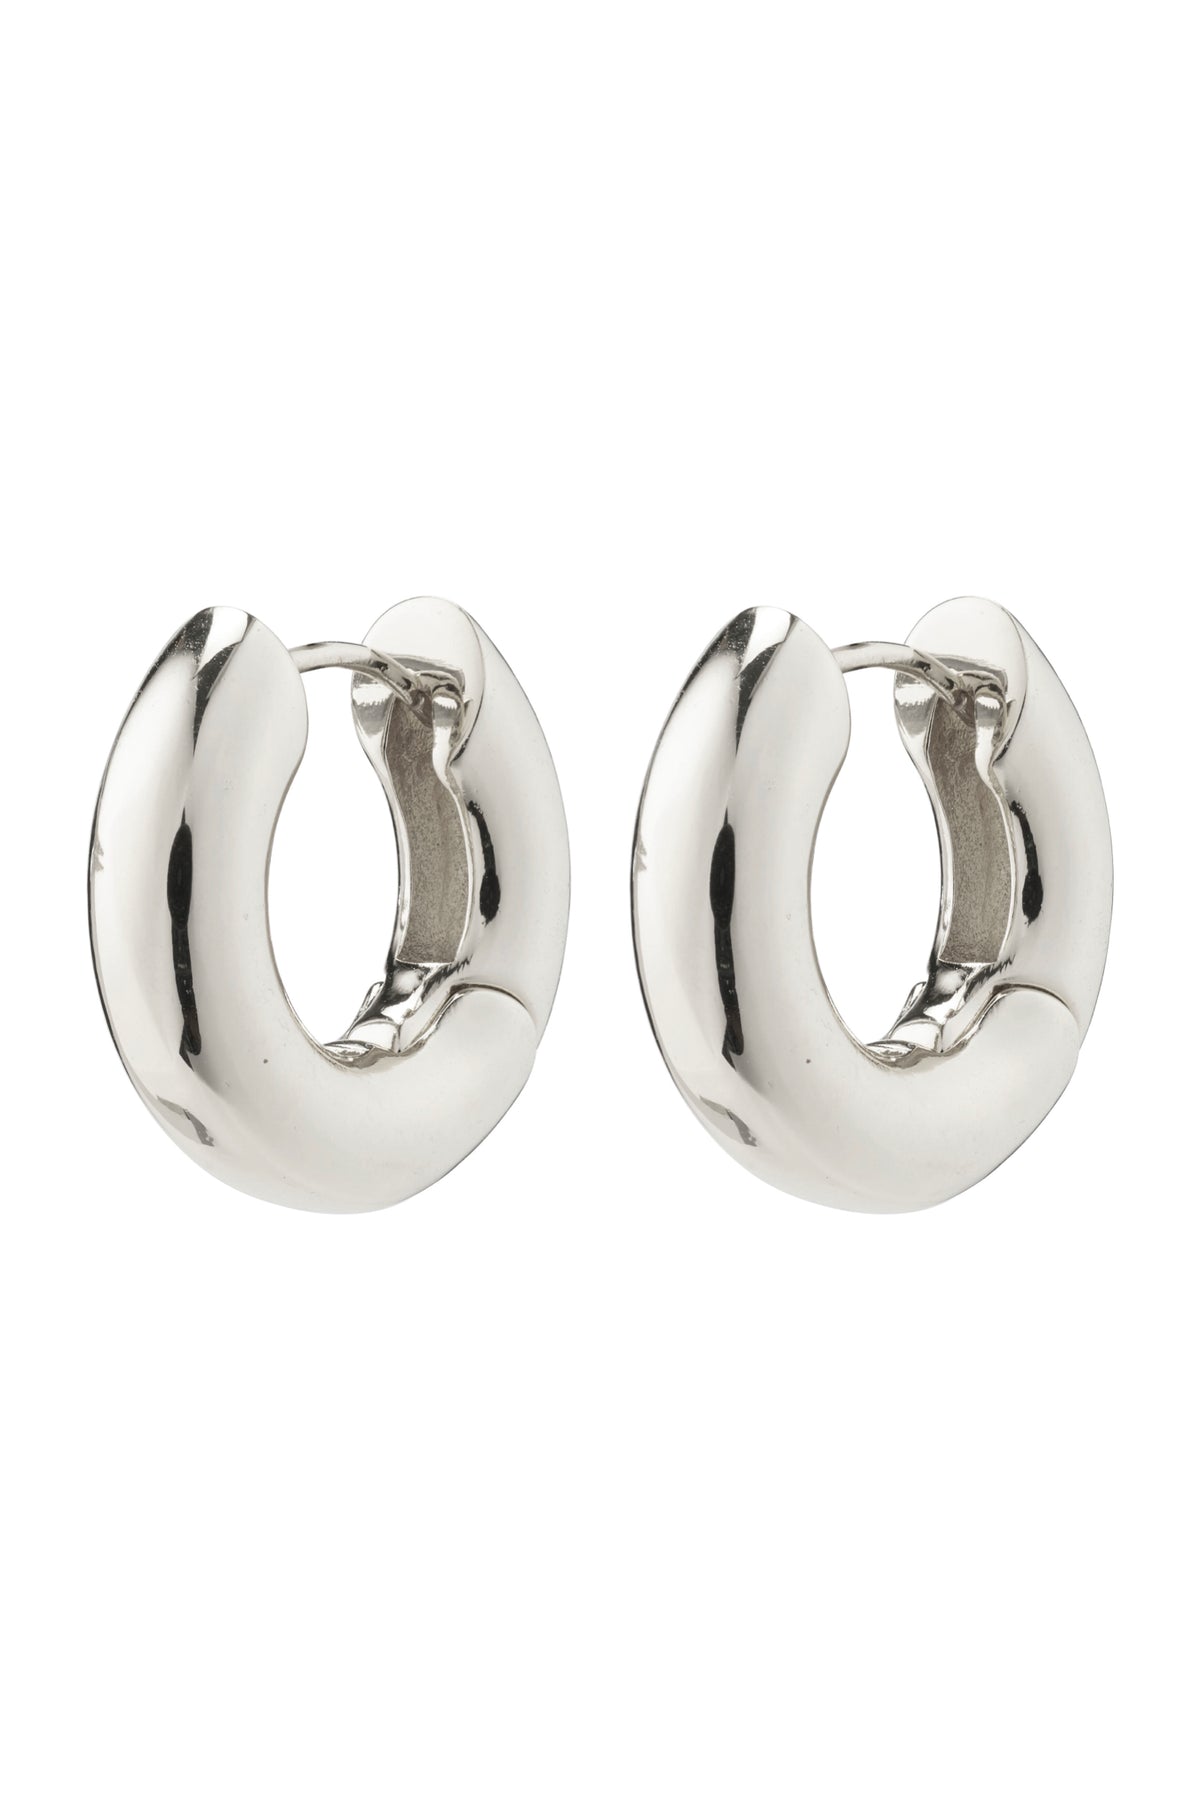 Aica Recycled Chunky Hoop Earrings - Silver Plated